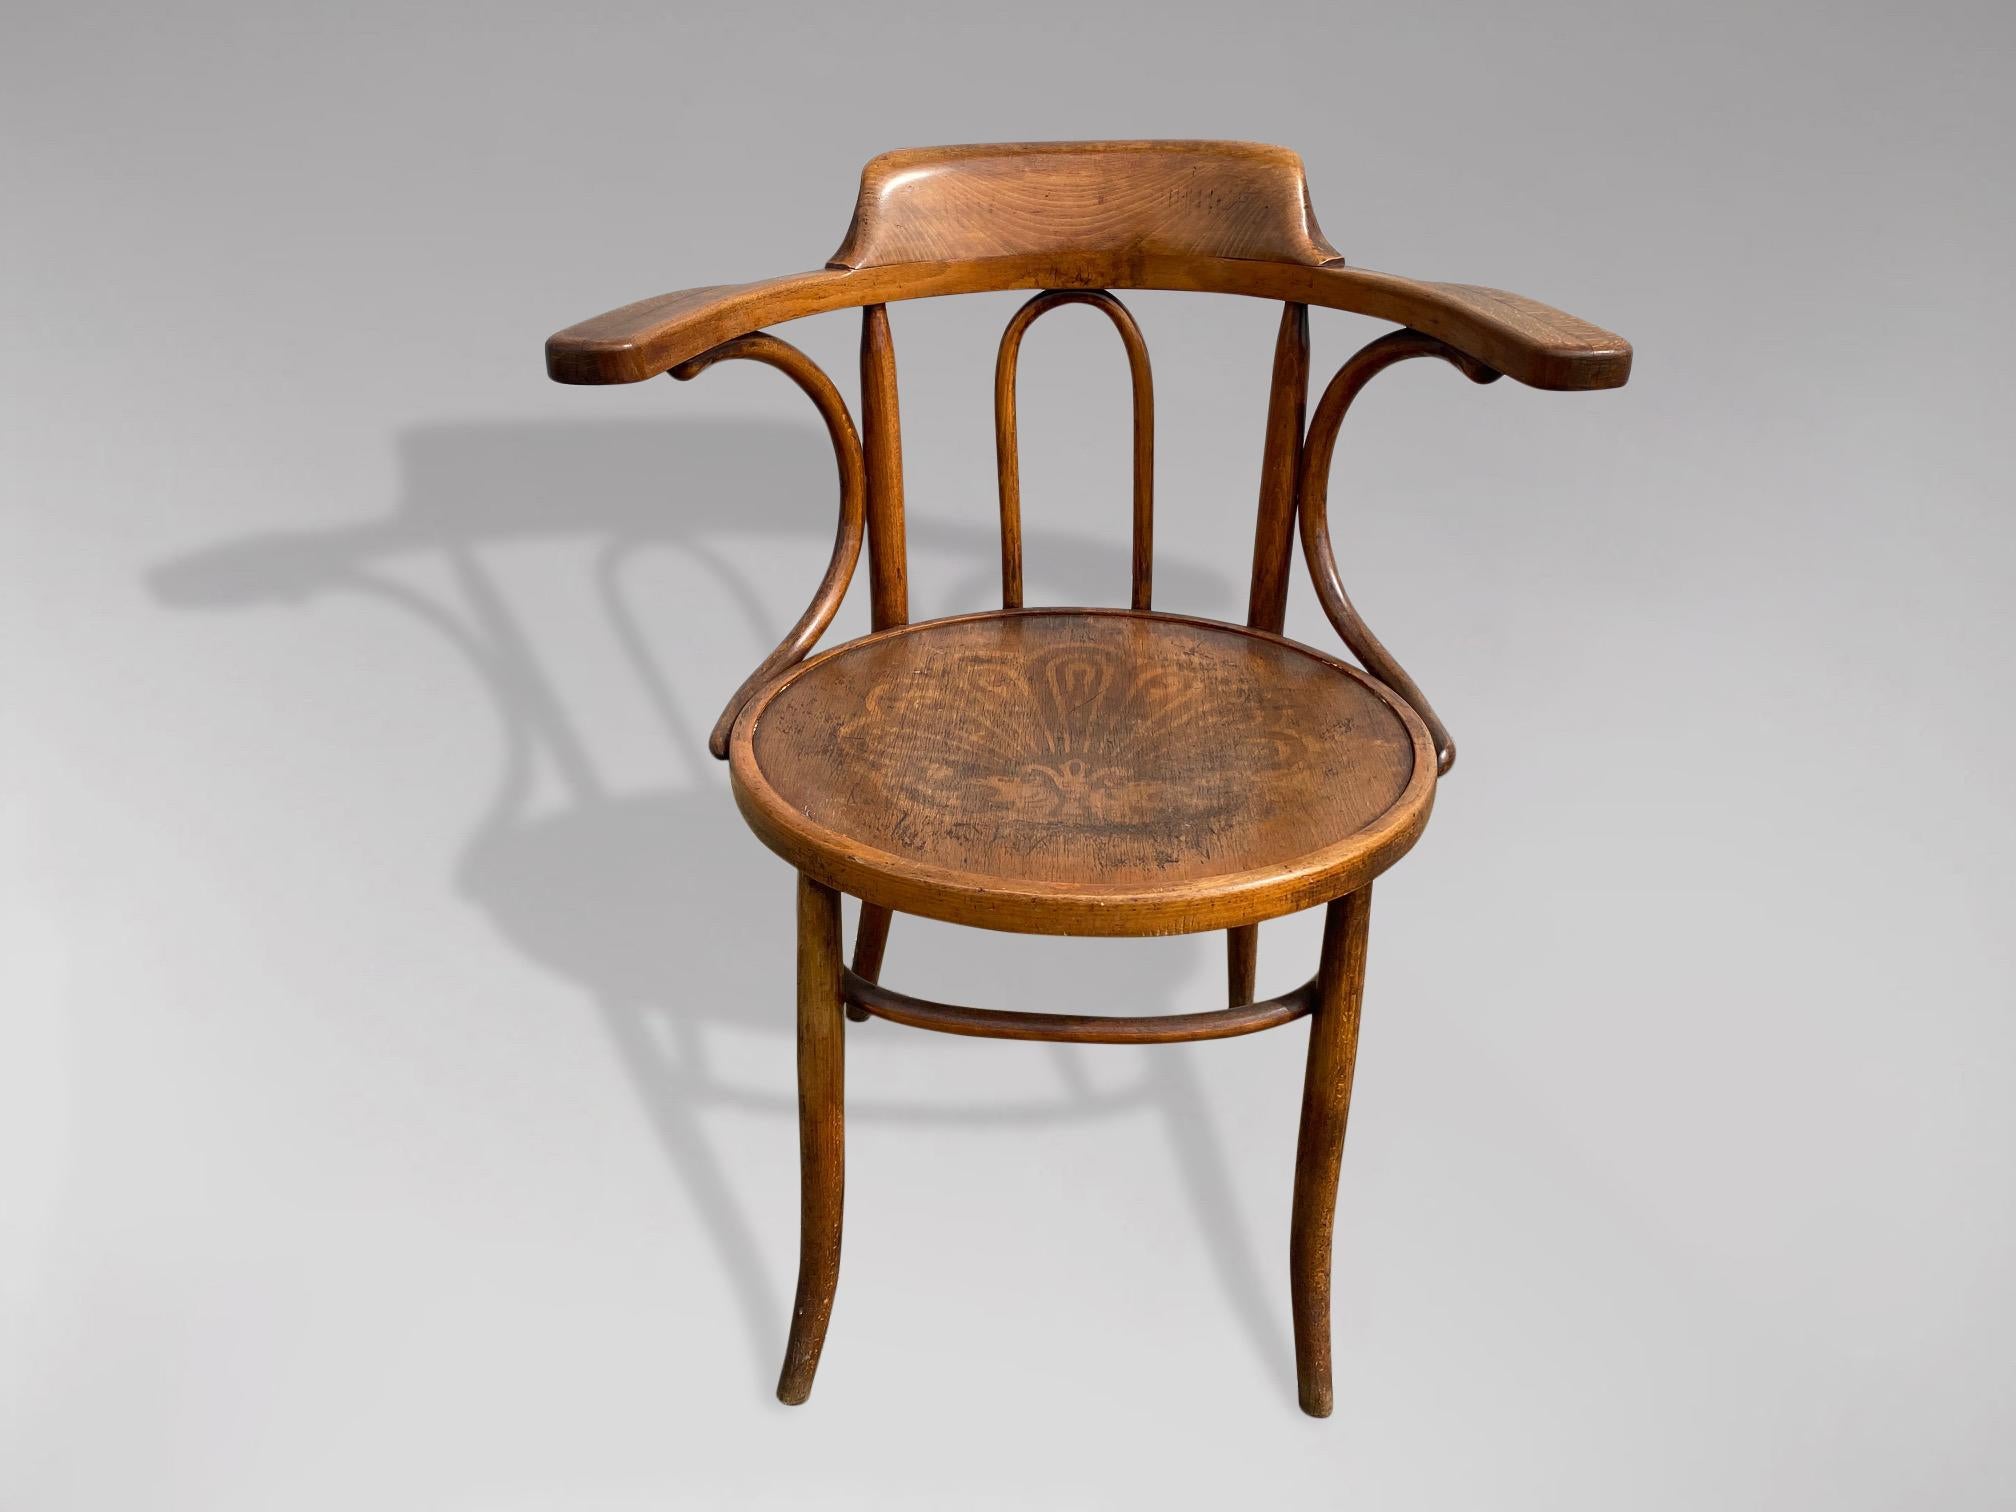 An early 20th century bentwood armchair in good original condition, manufactured by Thonet in Austria. Embossed seat with the back and armrests, supported by curved braces and the seat rests on gently curved legs joined by a circular support,